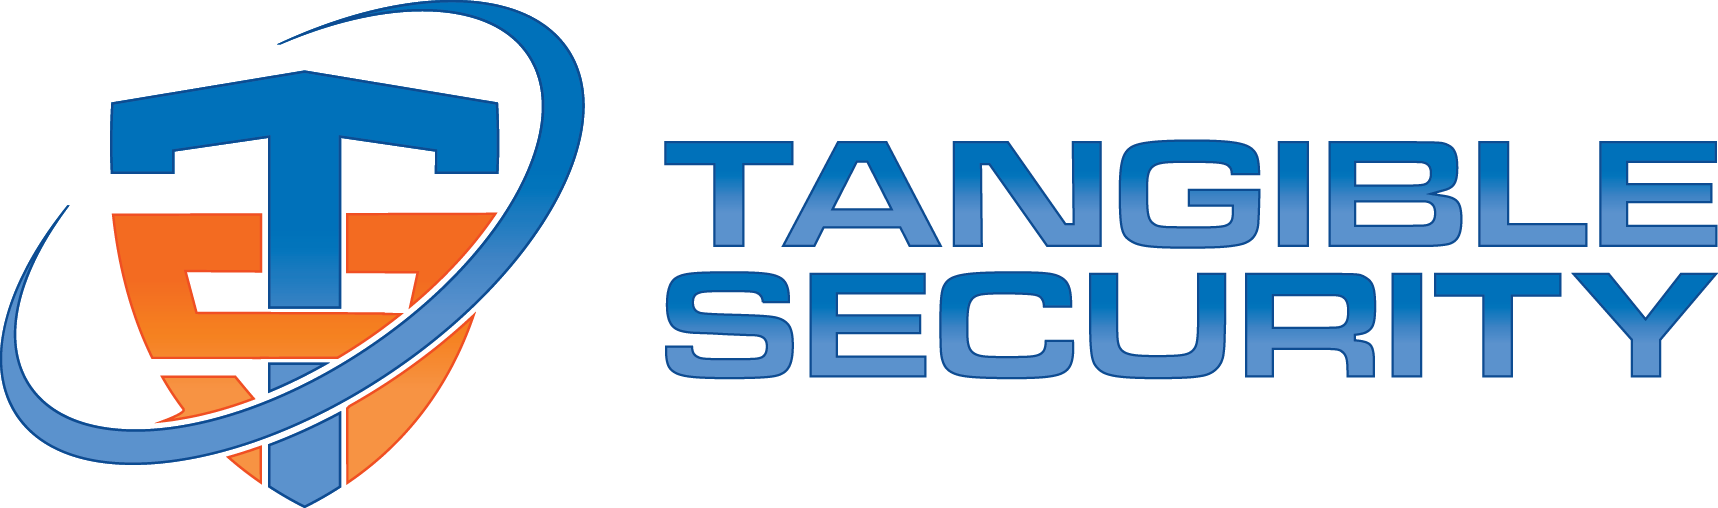 Tangible-Security-logo-Secondary-Stacked-Gradient-Large-1718x508-1